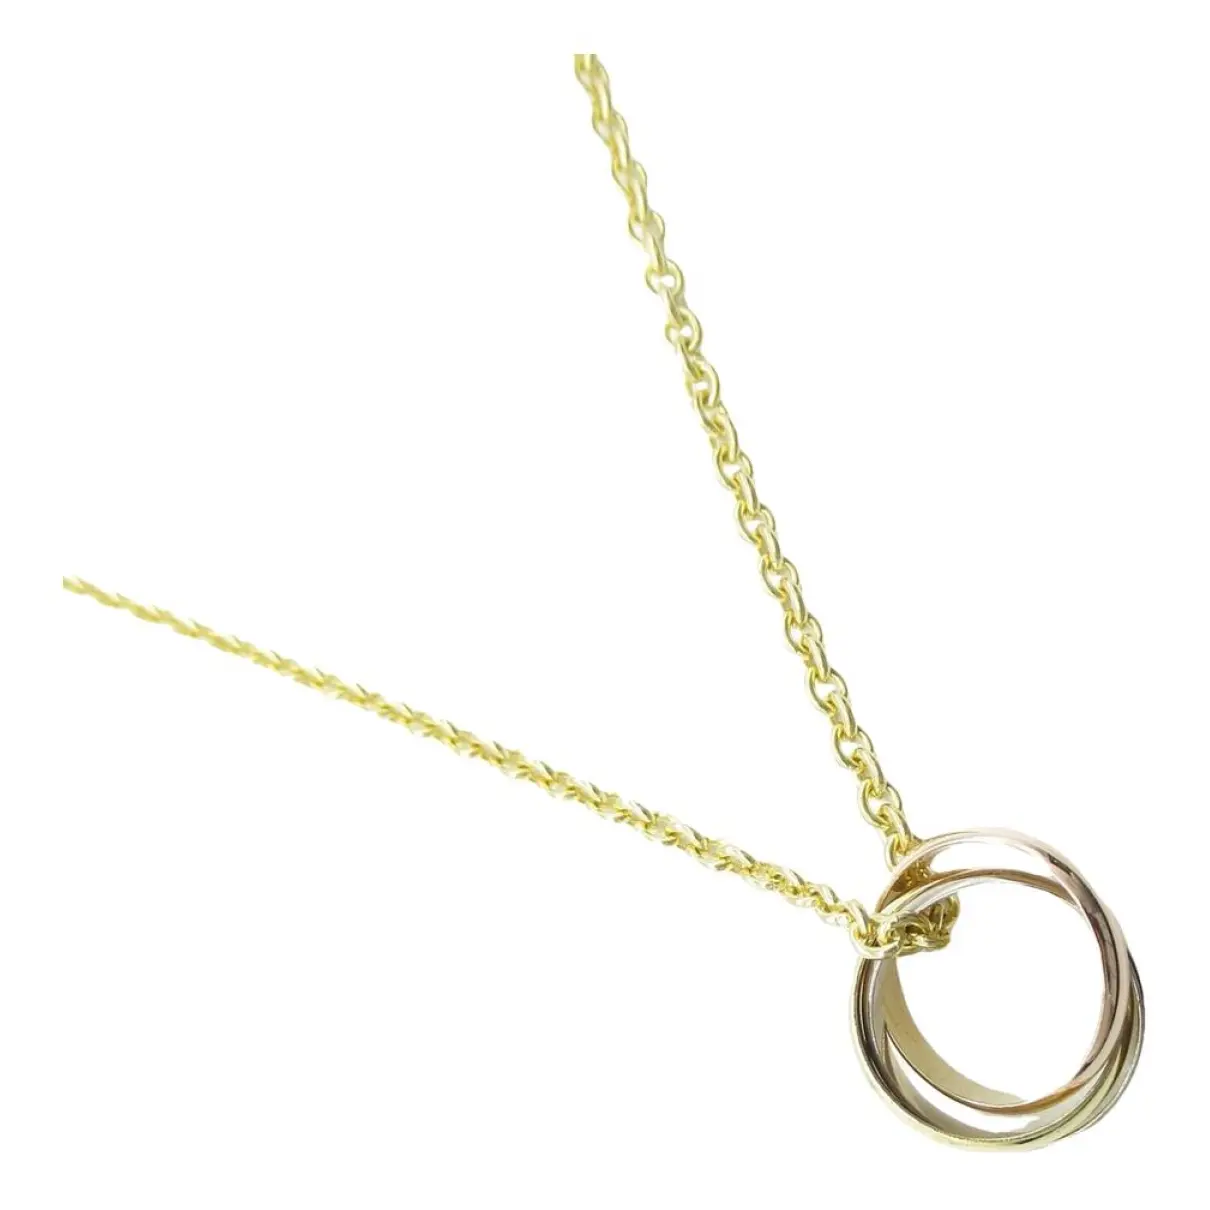 C yellow gold necklace